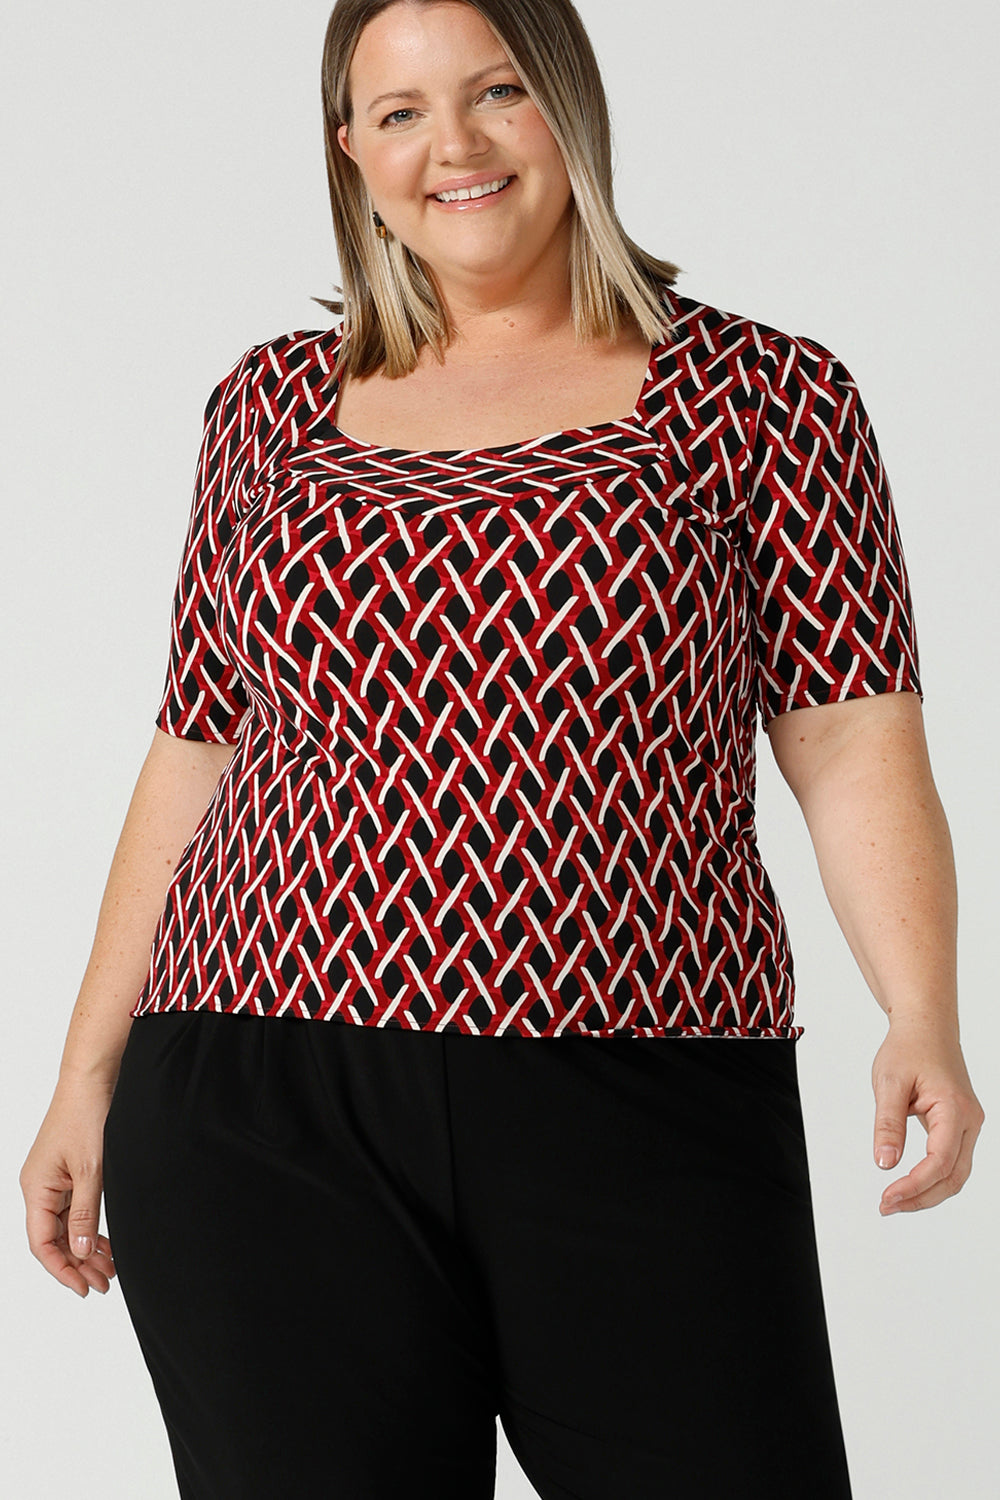 Curvy size 16 woman wears a geometric Chevron print Berni top. Corporate causal work wear top that is comfortable and versatile. Styled back with Black Indi pants. Made in Australia for women size 8 - 24.